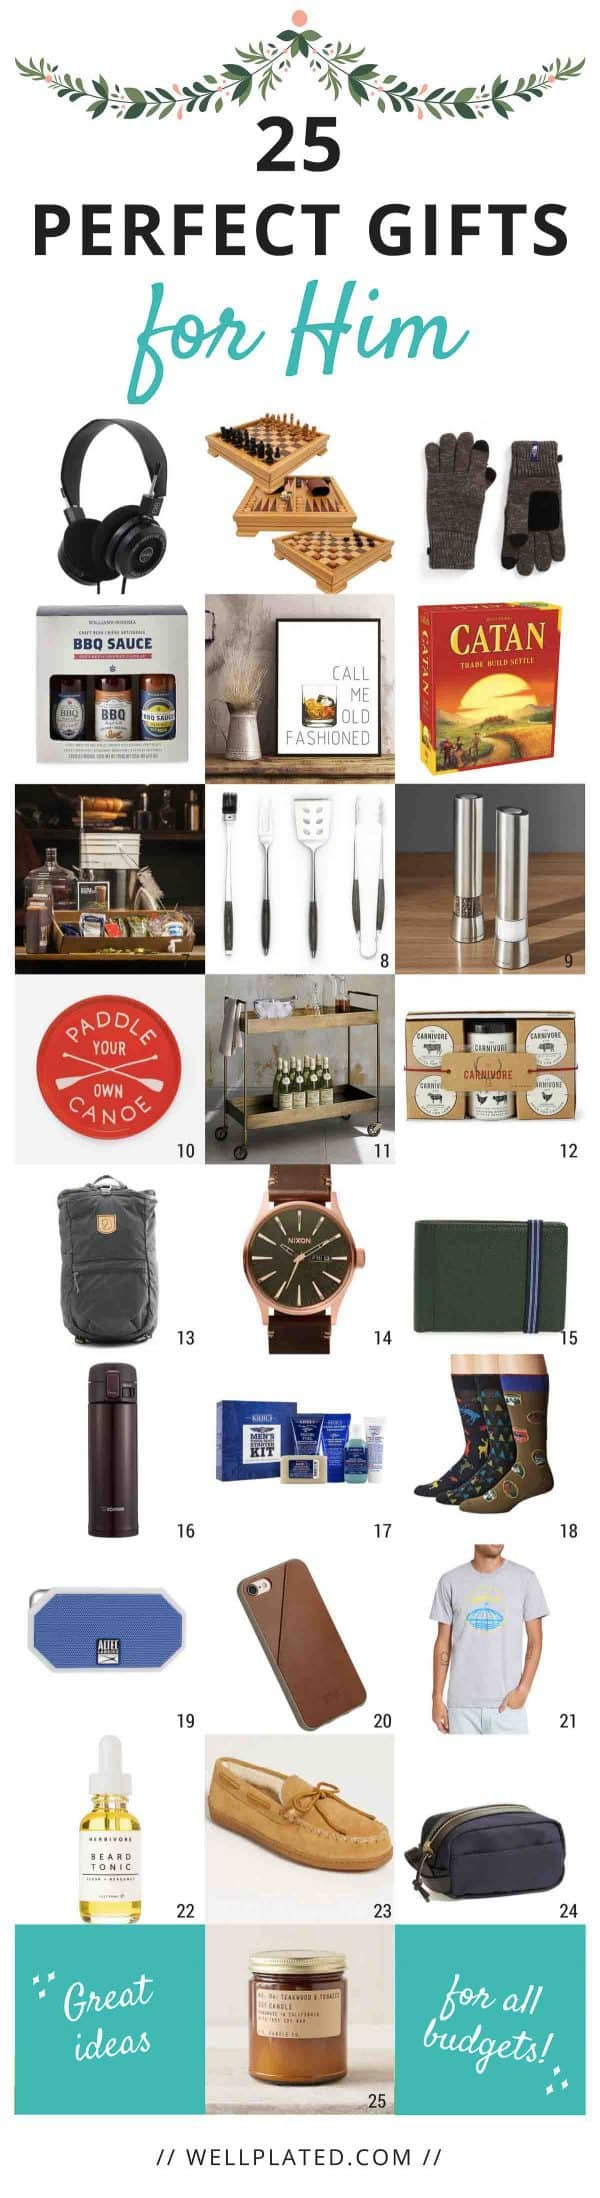 10 Spectacular Christmas Gift Ideas For Husbands 25 unique gift ideas for your husband dad boyfriend and more 1 2022